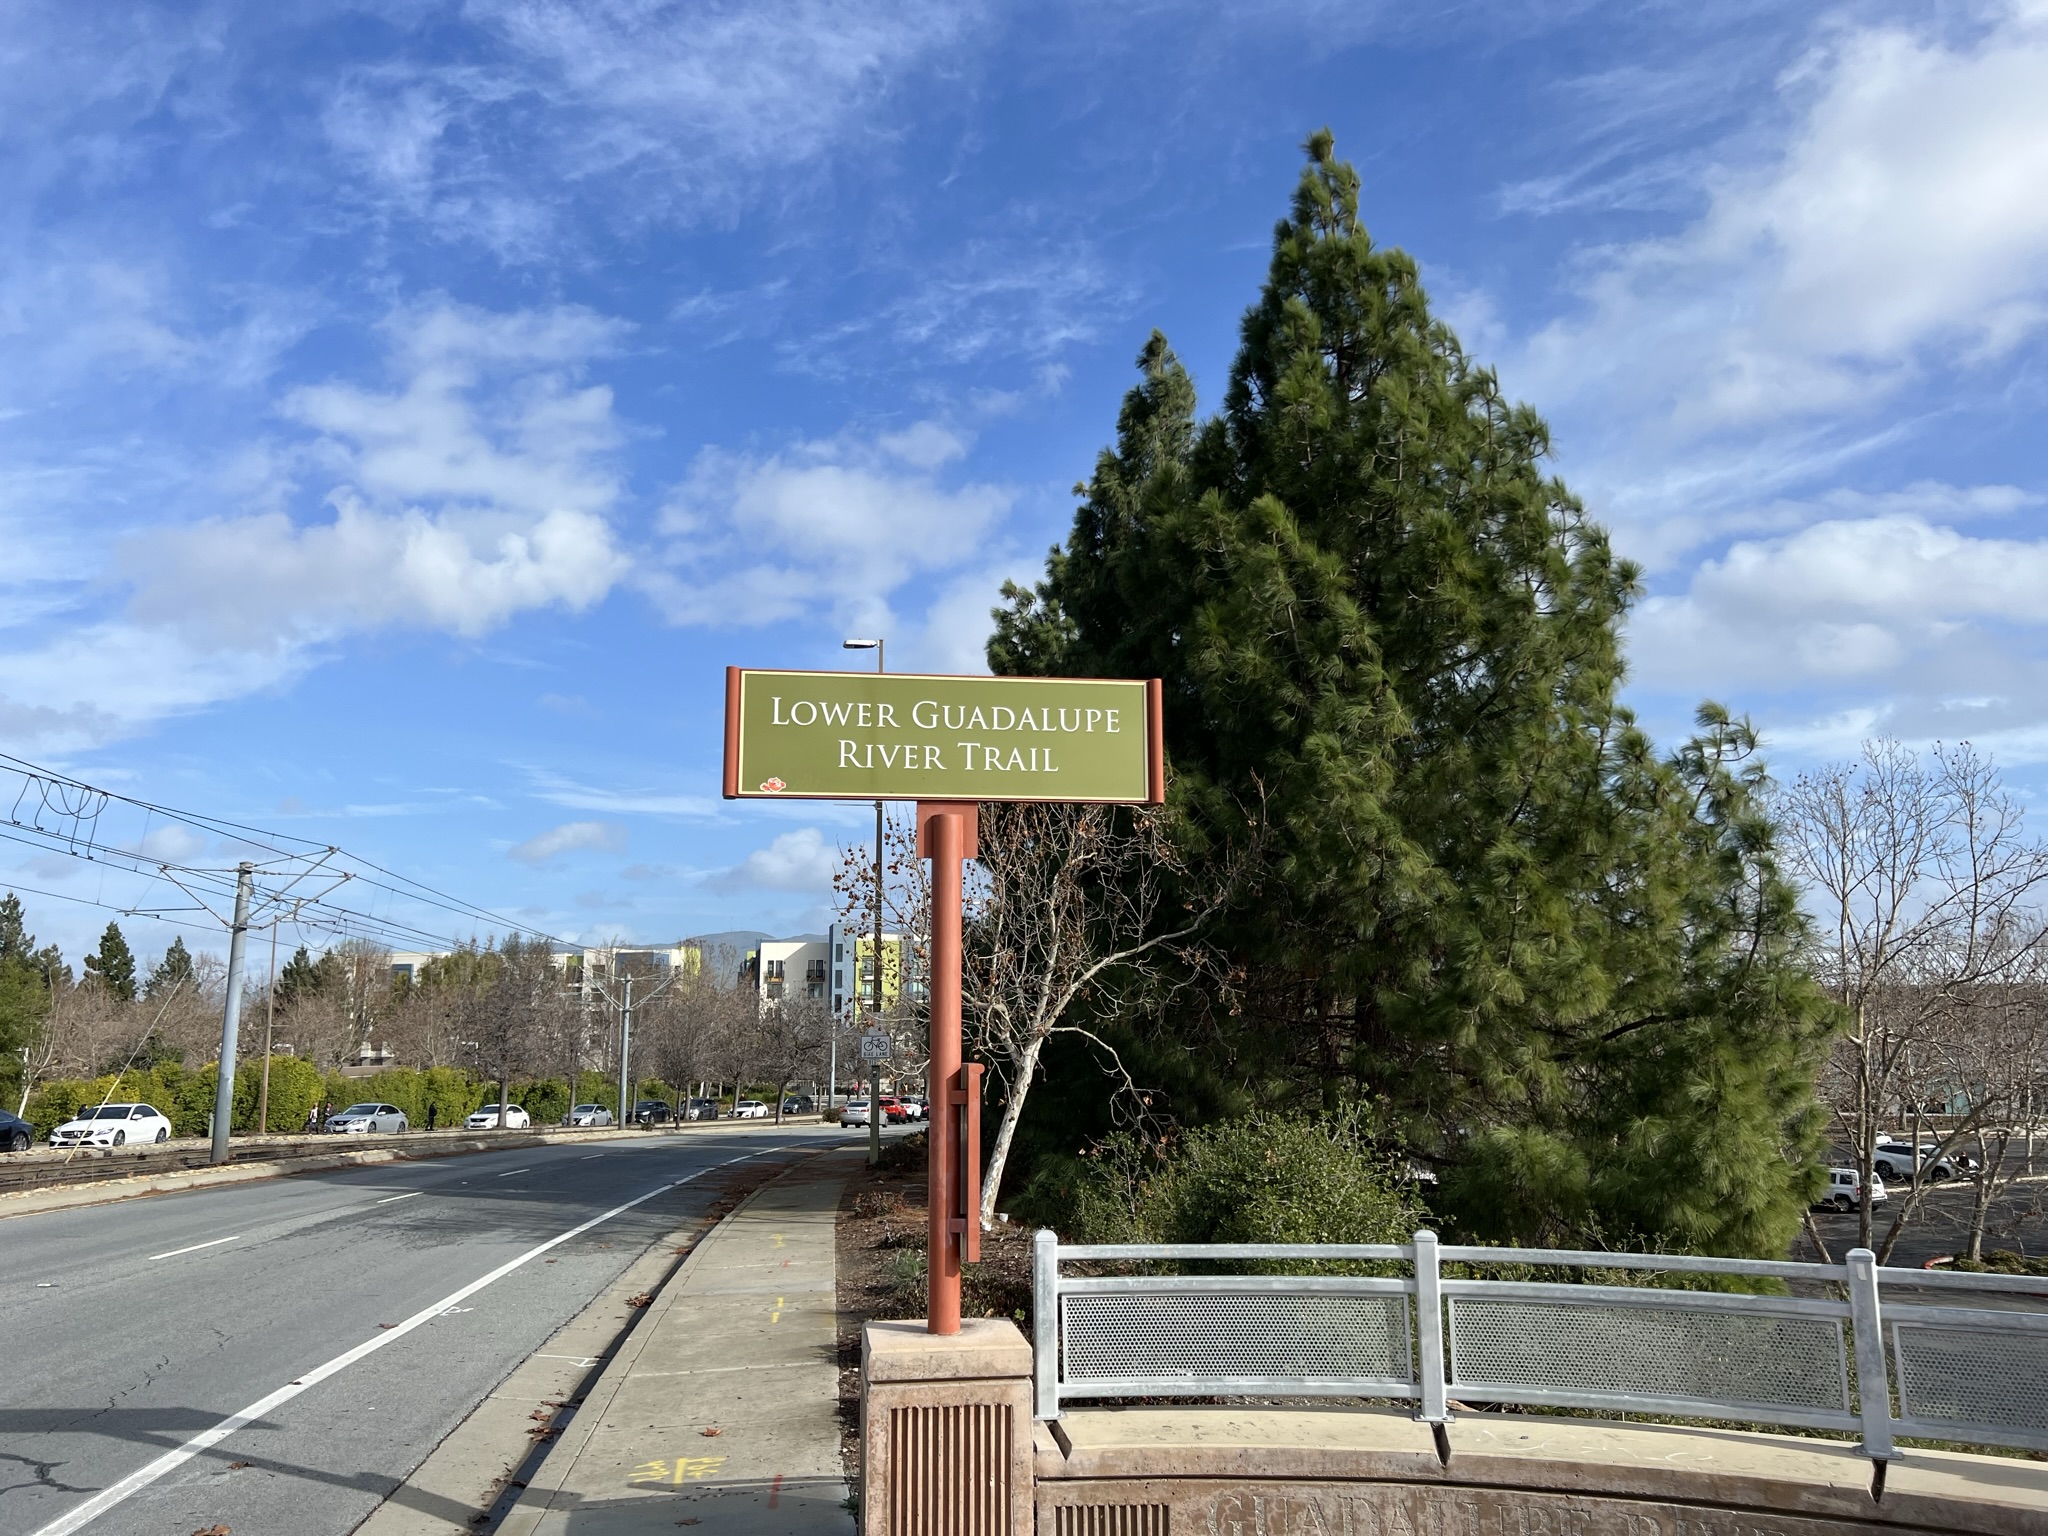 Lower Guadalupe River Trail 的牌子